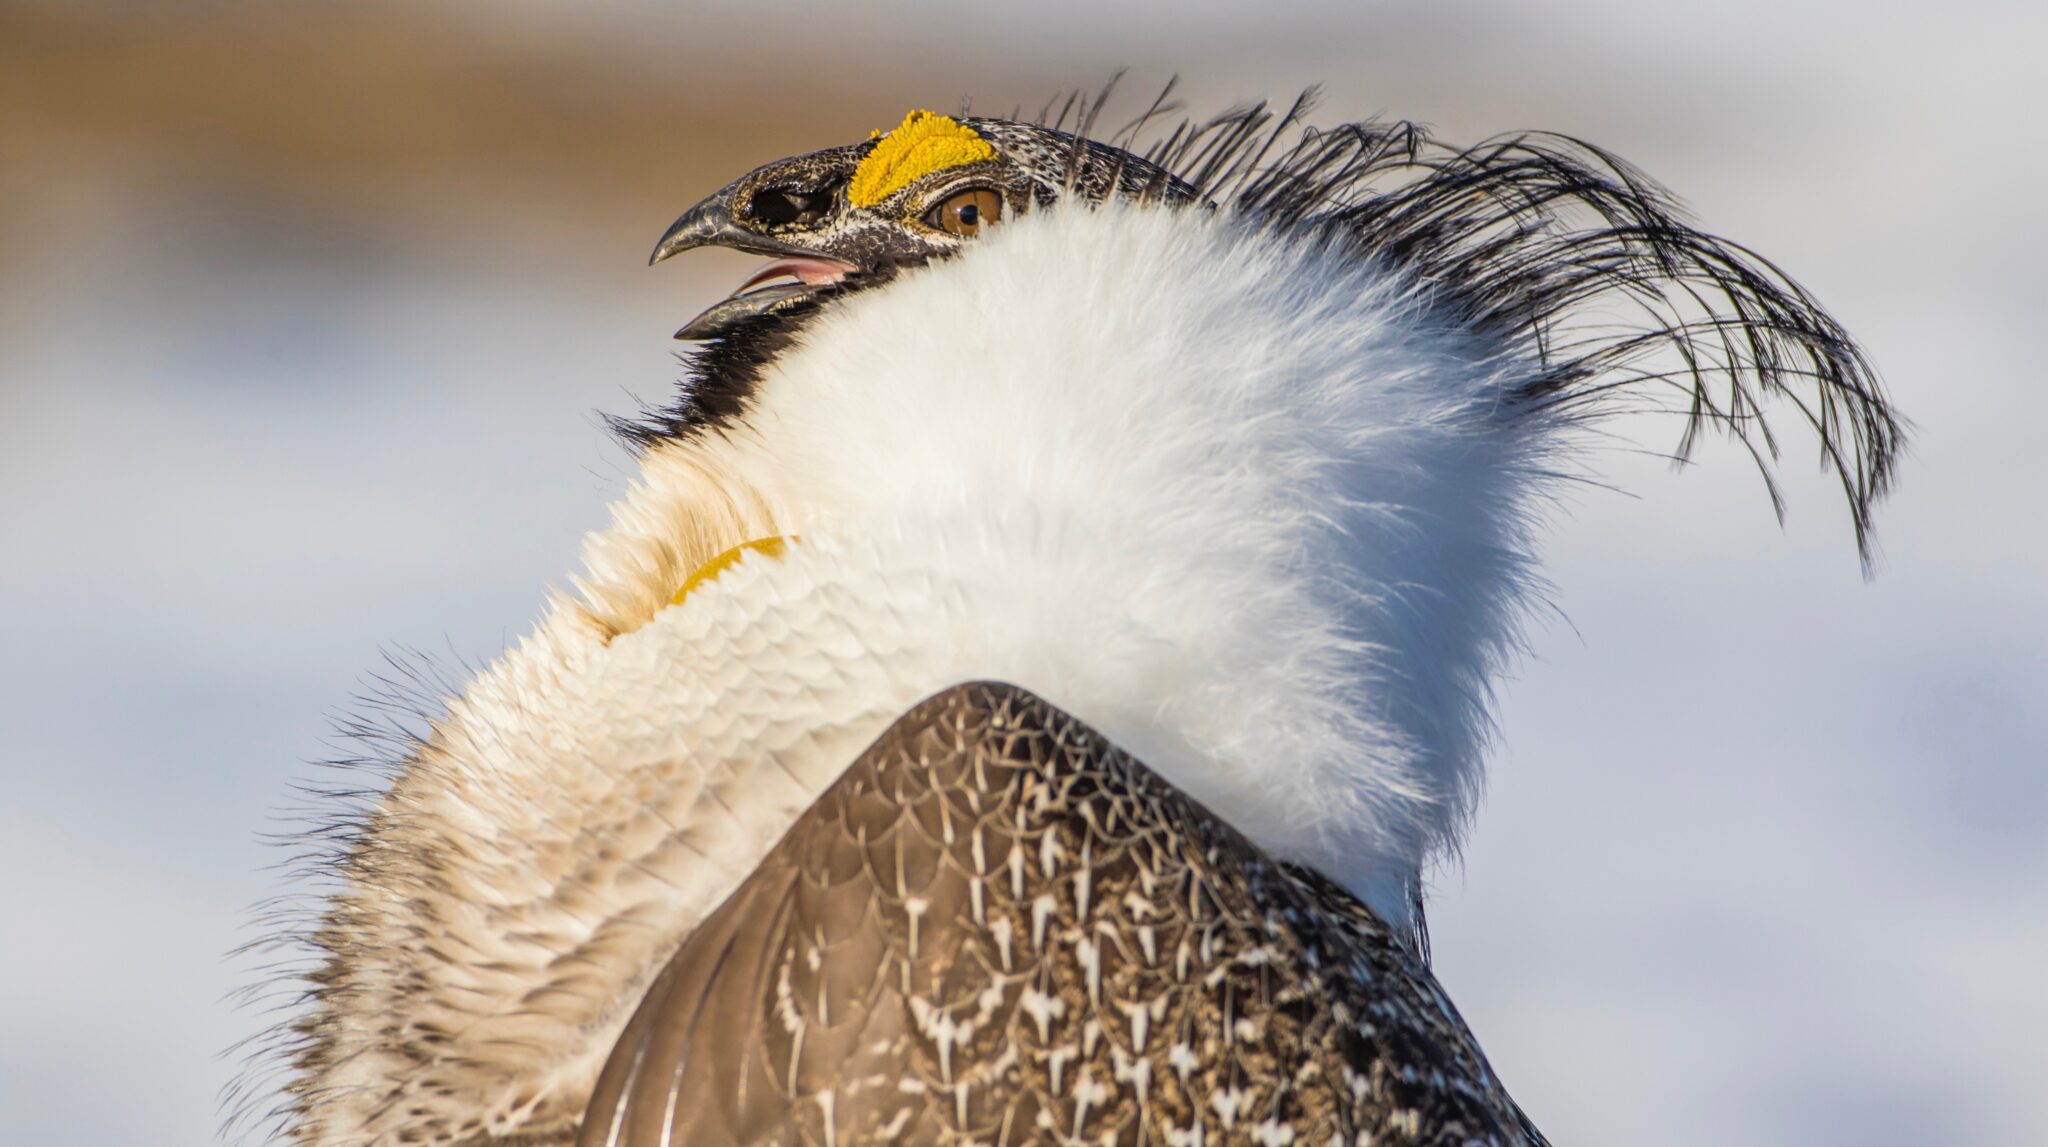 Feds Move to Slash Sage Grouse Protections For More Oil & Gas Development